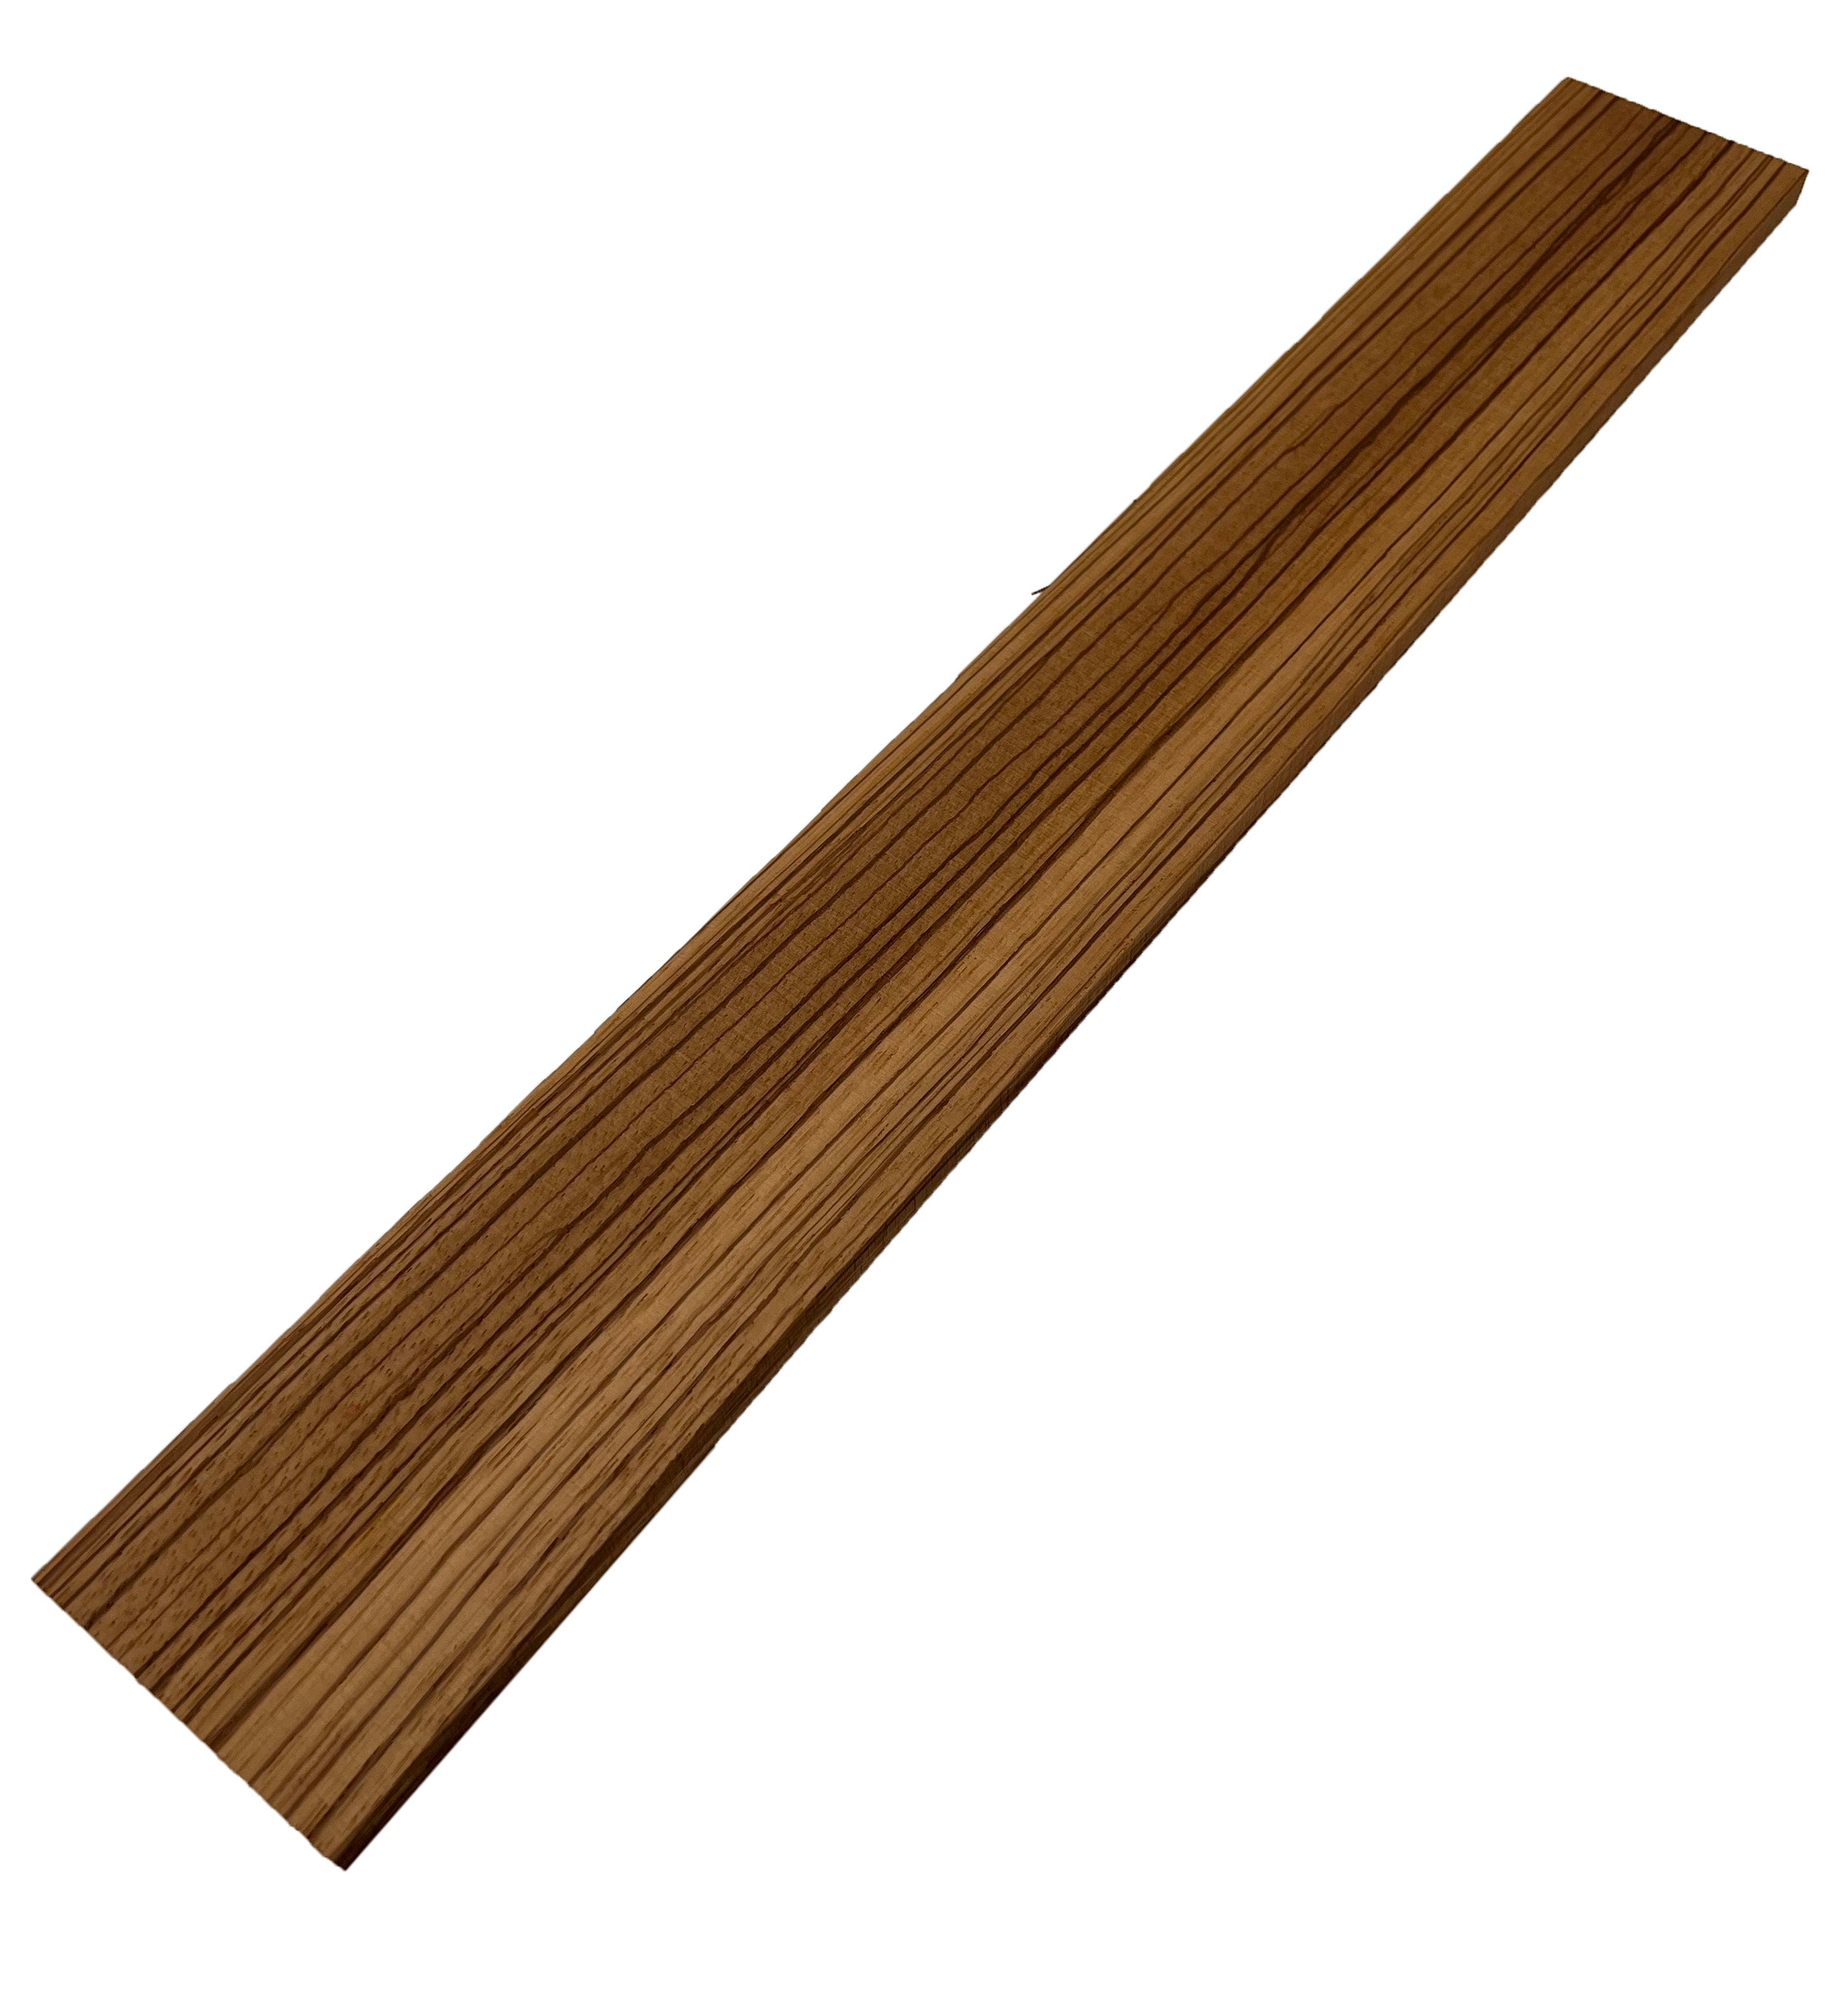 Zebrawood Thin Stock Lumber Boards Wood Crafts - Exotic Wood Zone - Buy online Across USA 